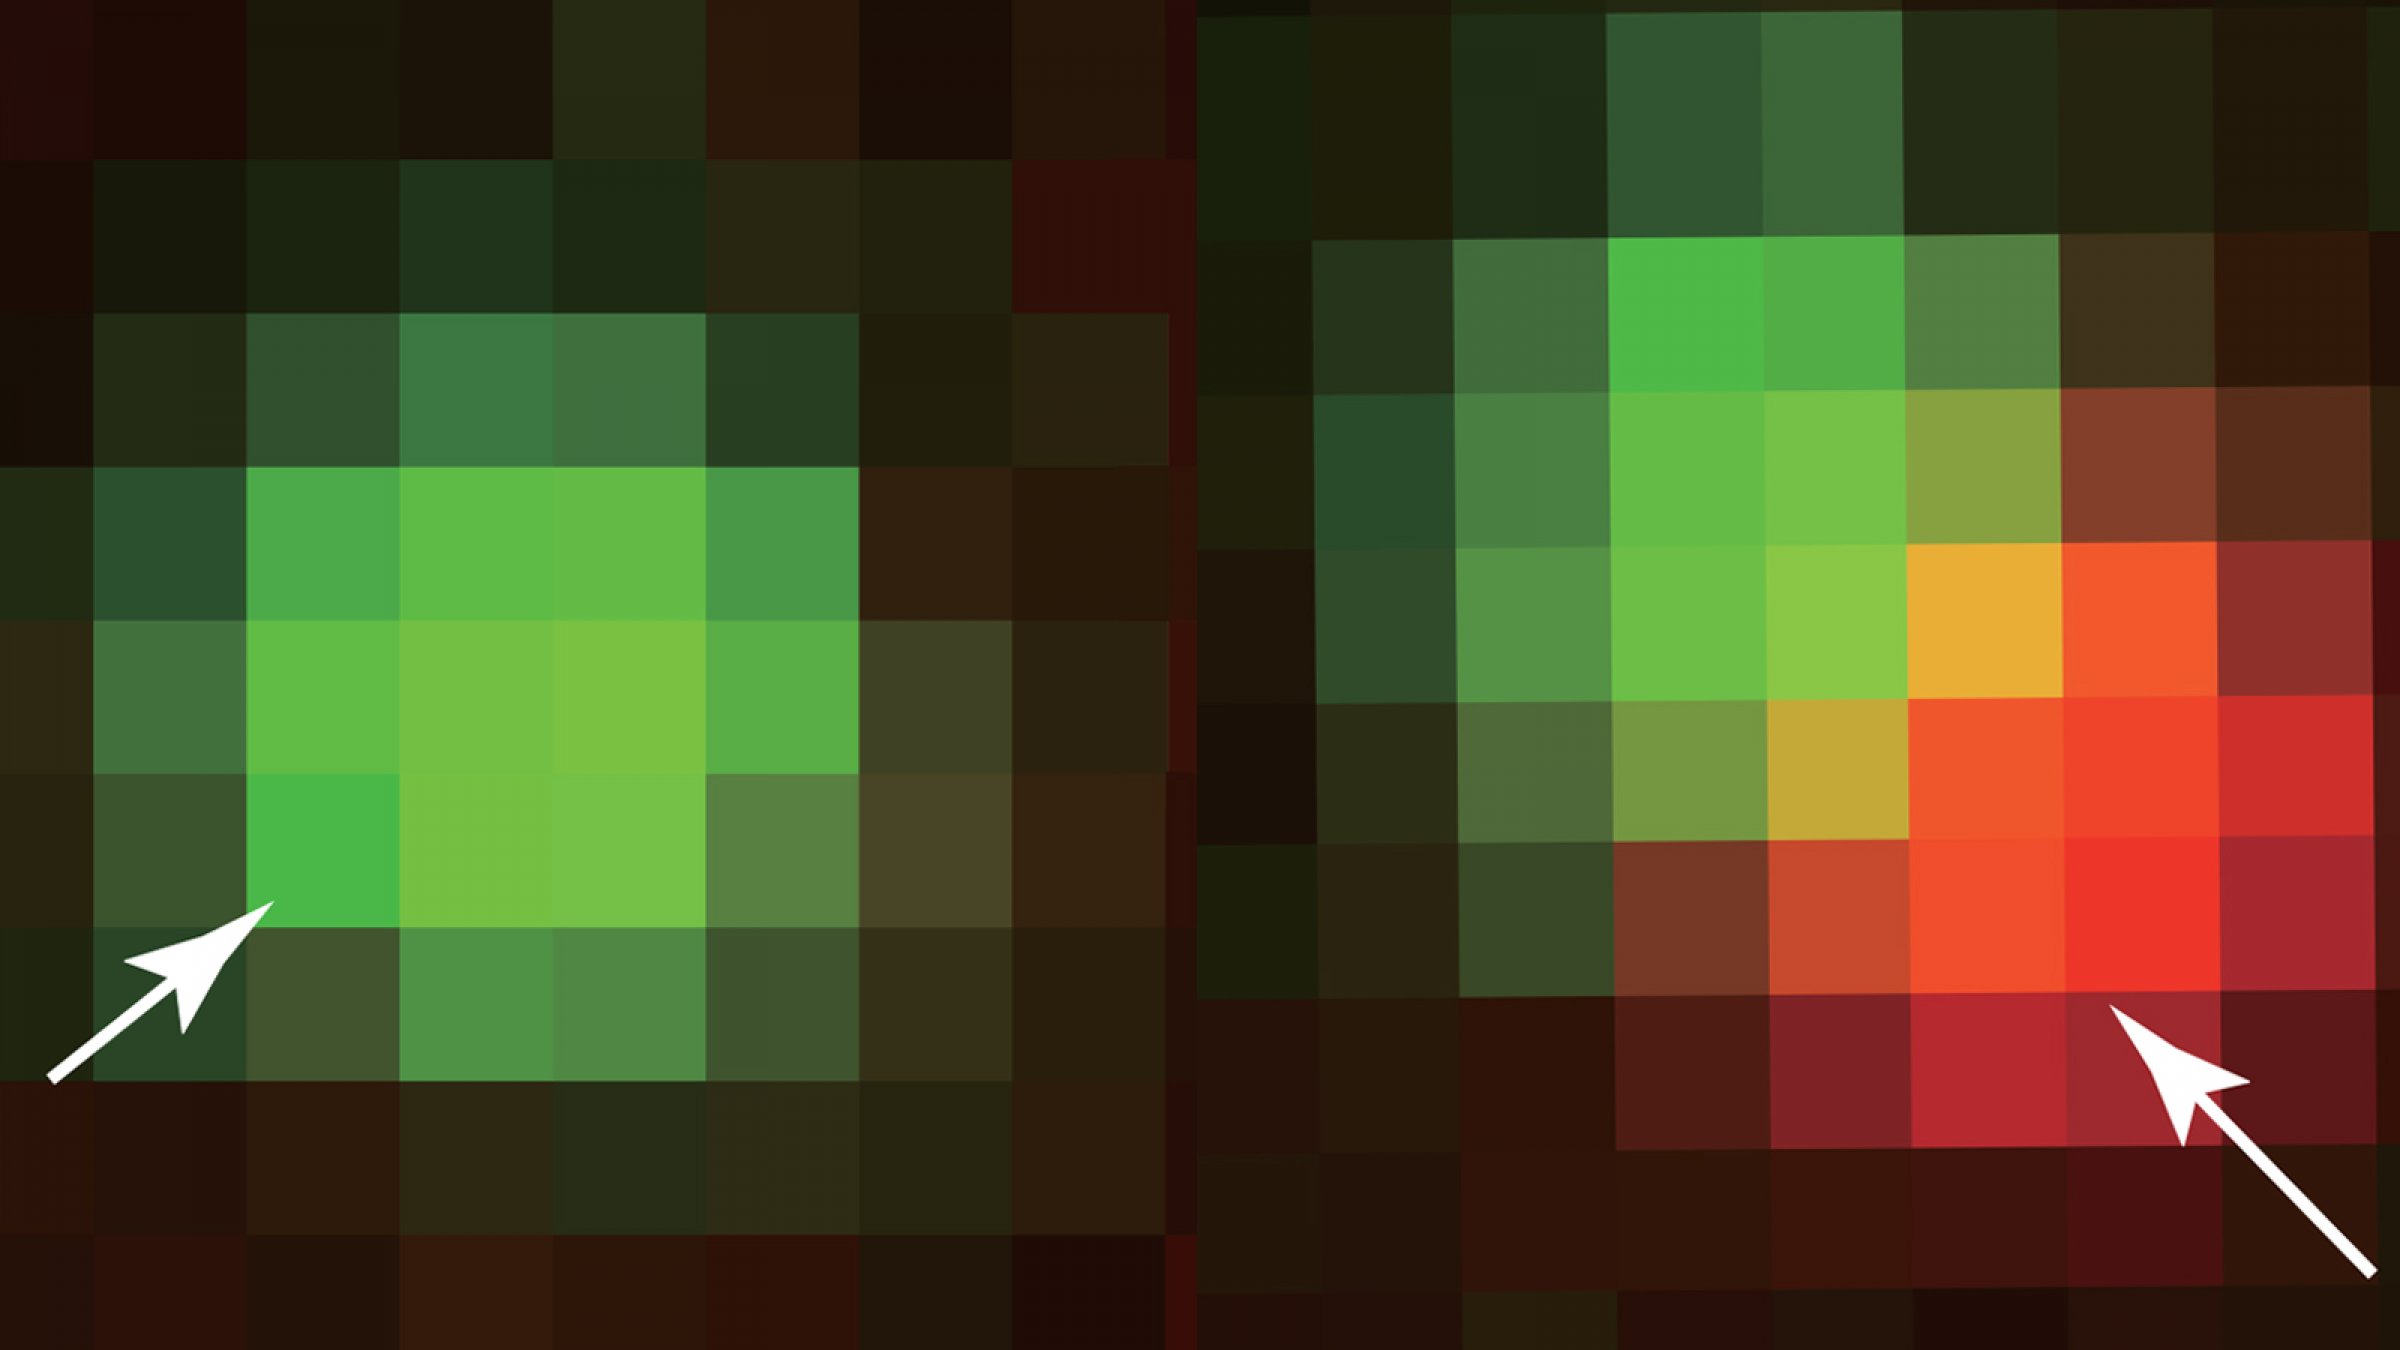 Two pixilated green blobs, one with a red patch